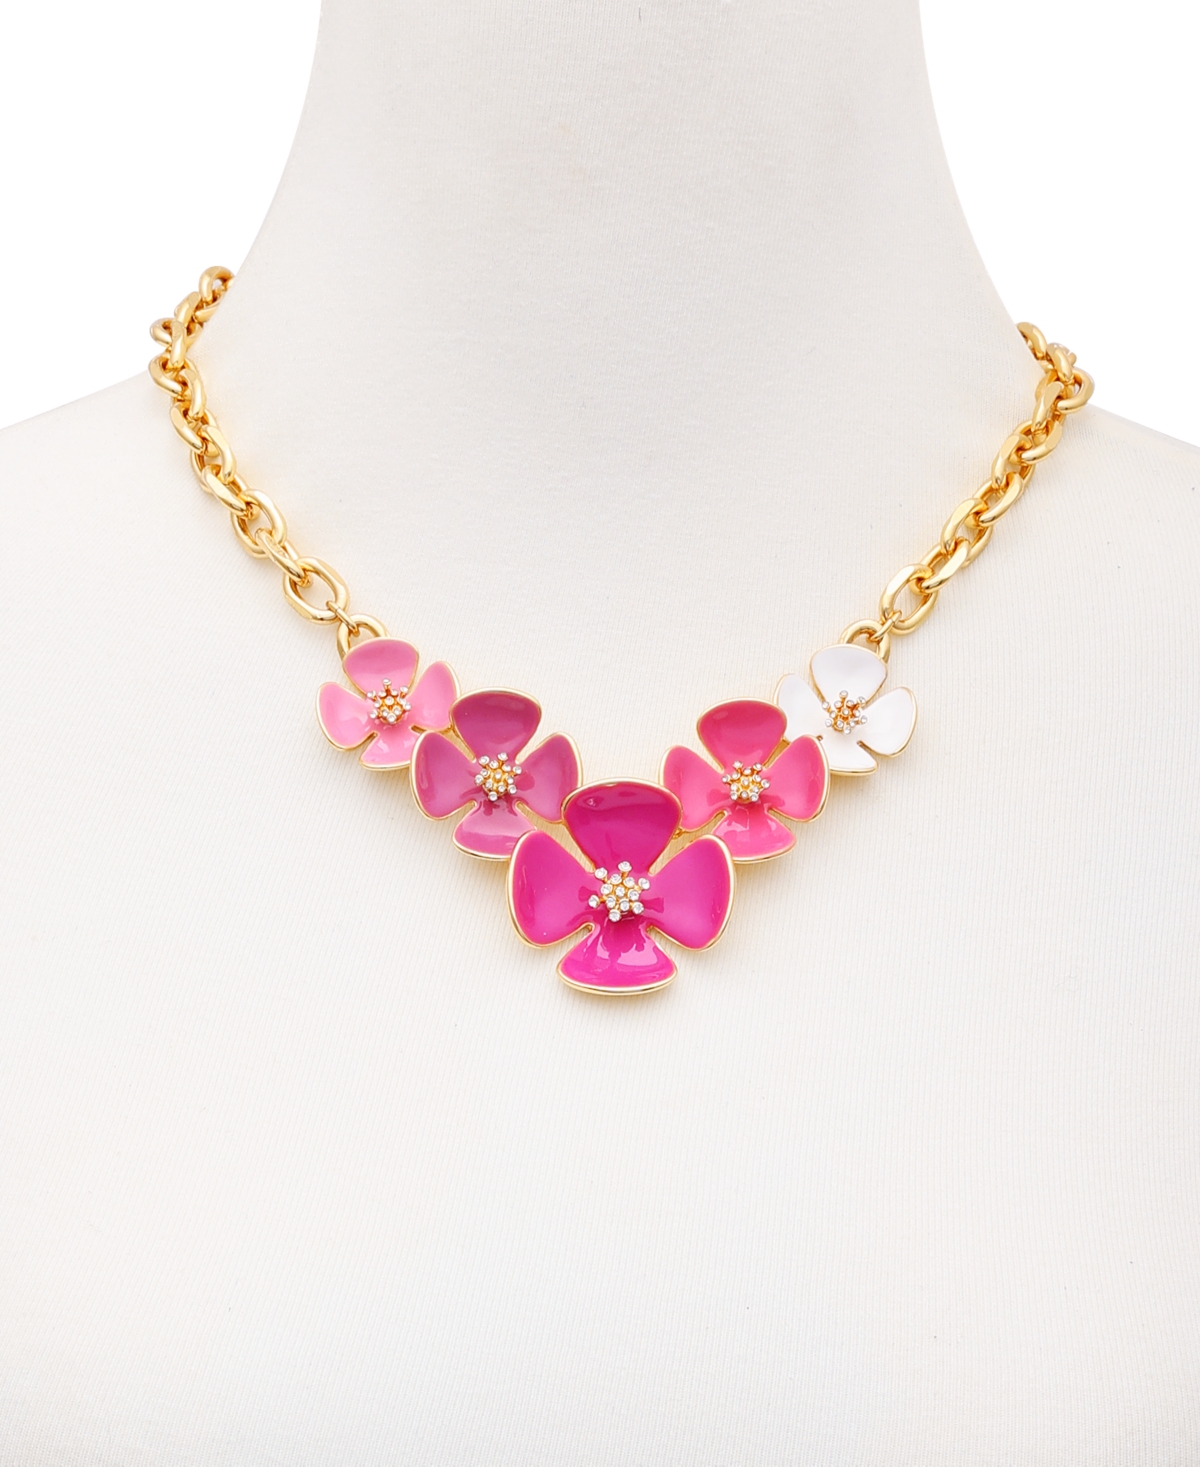 Shop Guess Gold-tone Pink Flower Frontal Necklace, 18" + 2" Extender